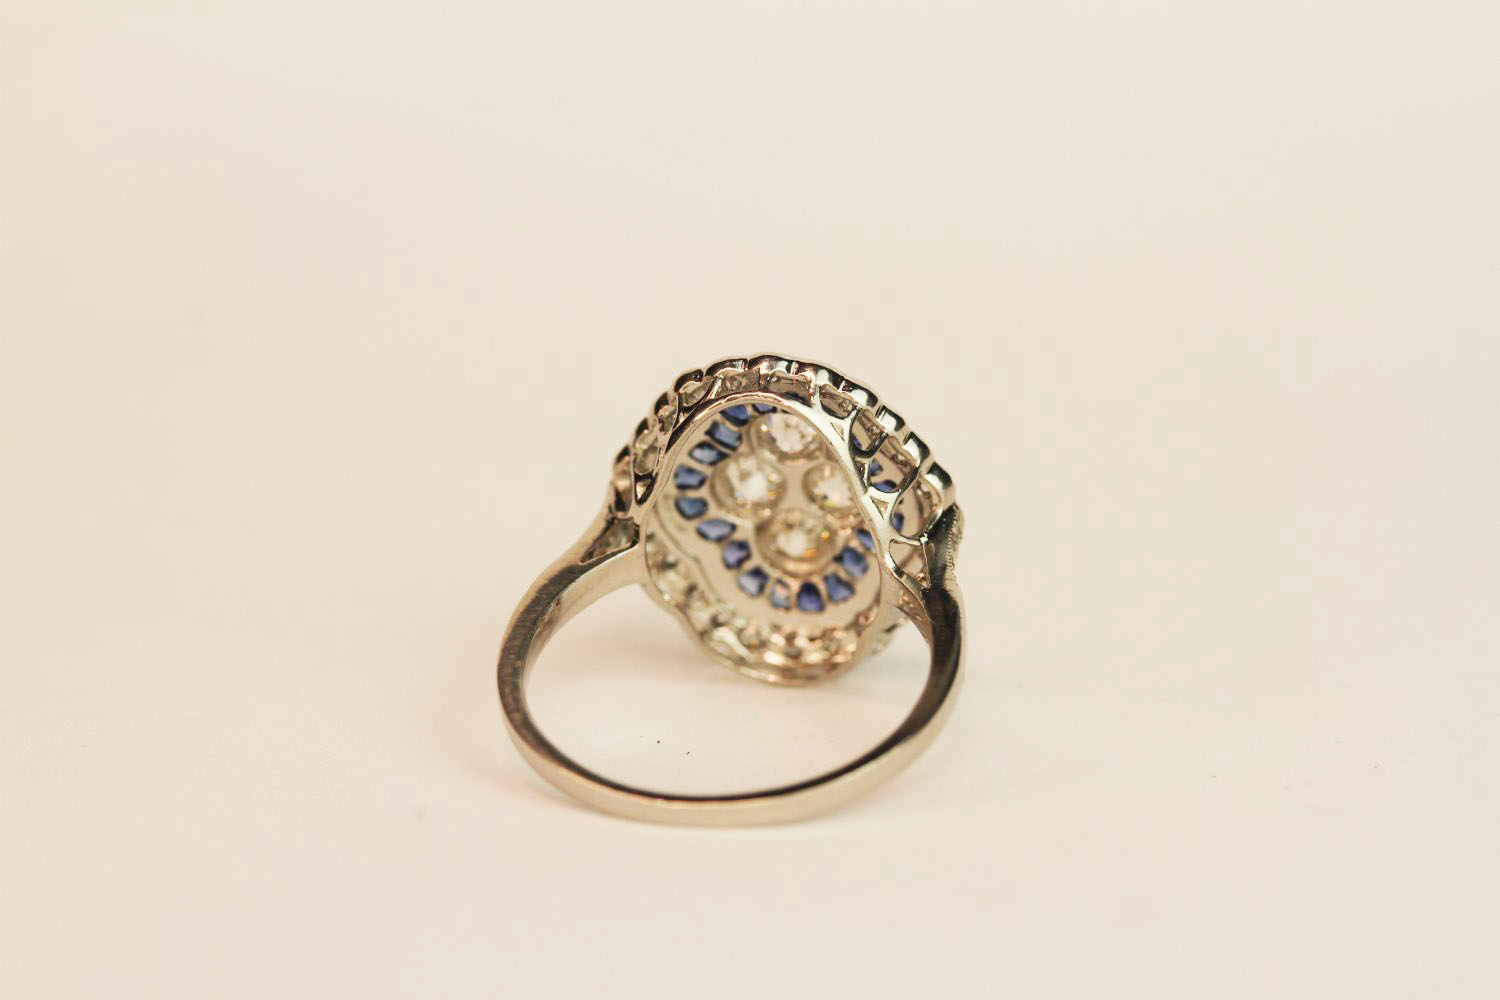 Platinum sapphire and diamond ring. Set with 4 central diamonds, surrounded by an inner halo of - Image 3 of 3